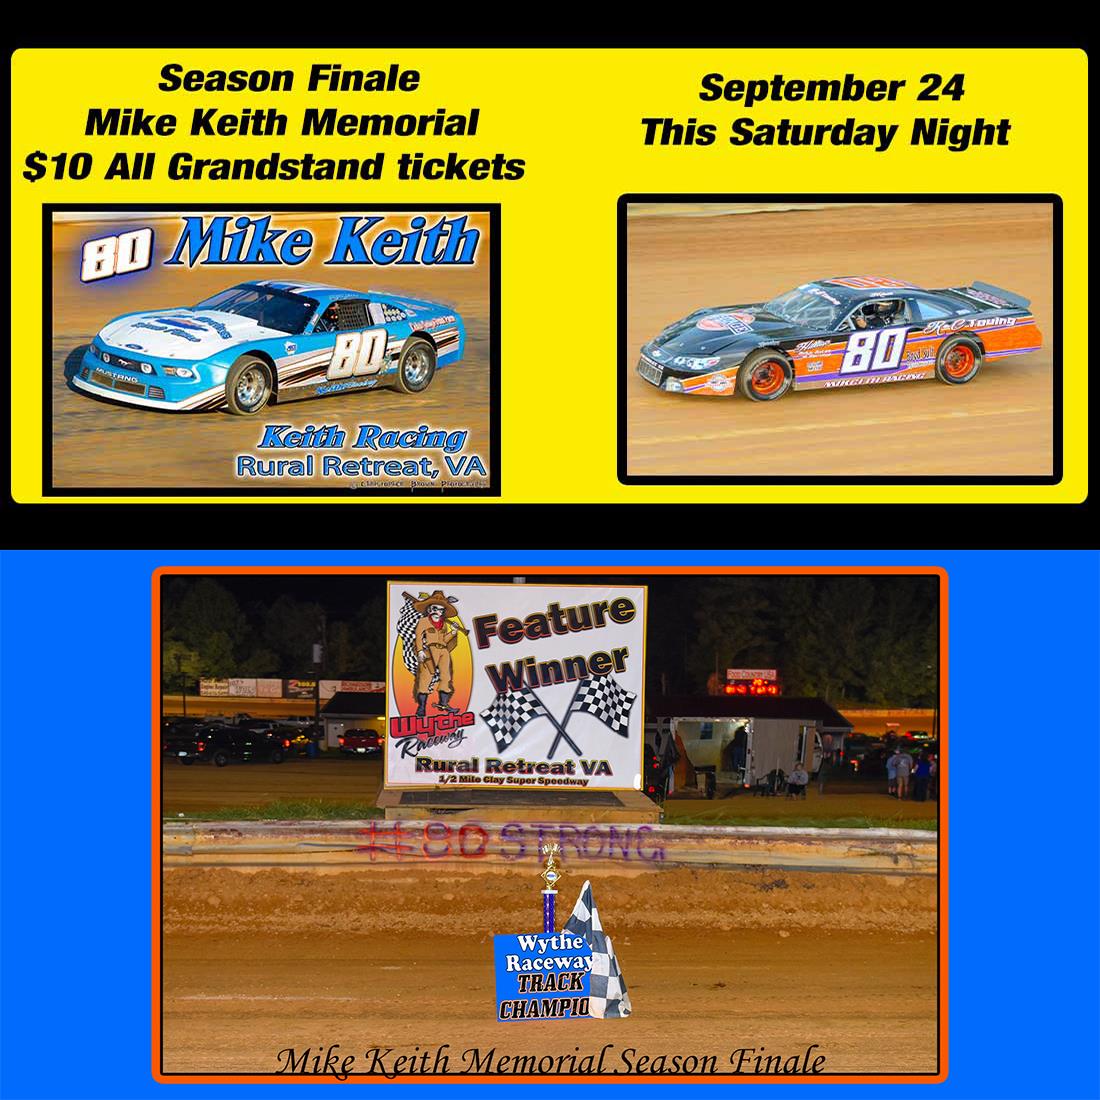 Mike Keith Memorial Season Finale Grandstands $10 – Adults/Senior/Military Double Points &amp; Increased Purse